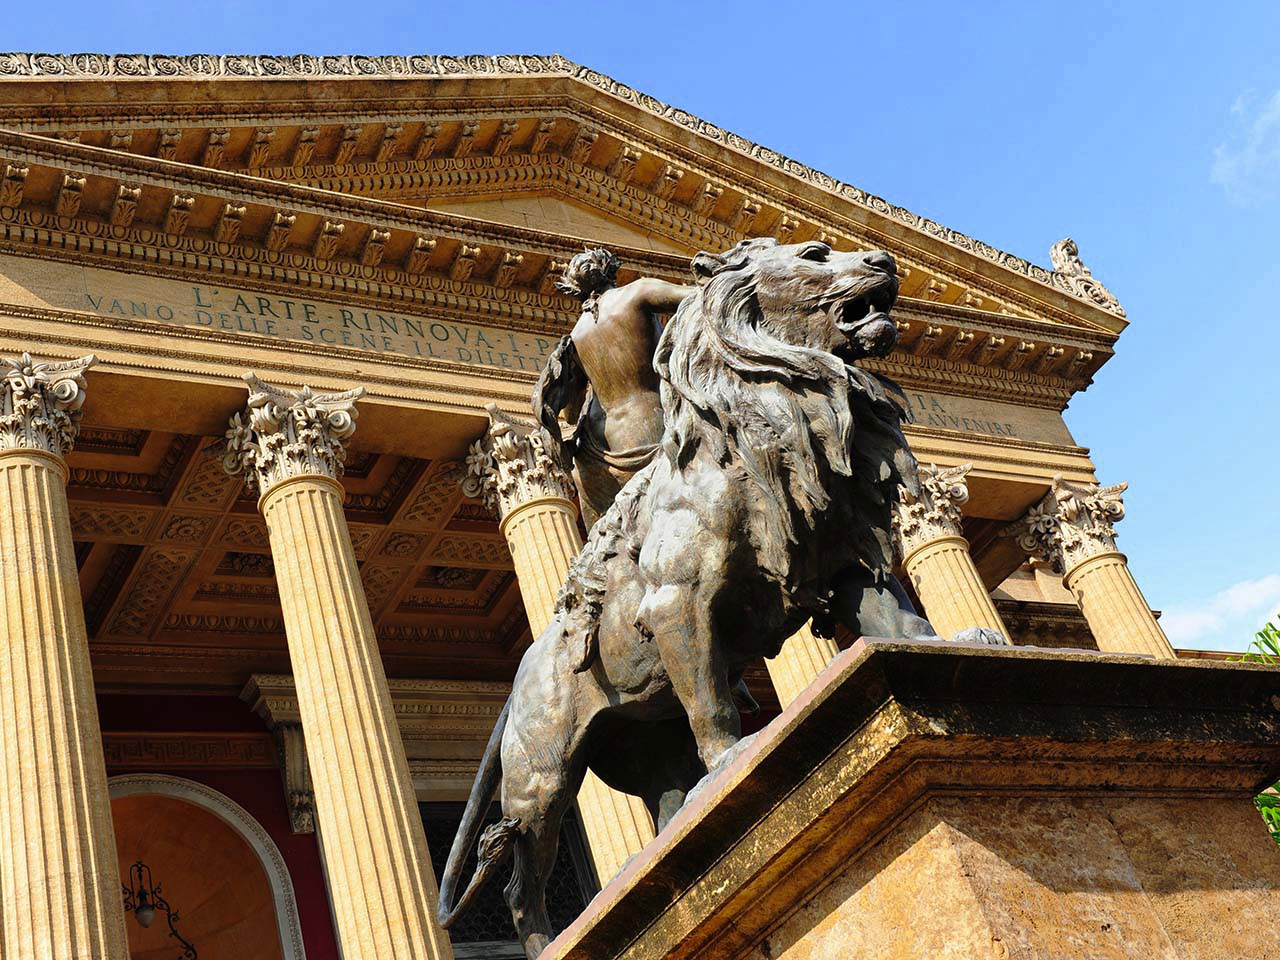 Teatro Massimo in Palermo viewed from below with the lion statue in the foreground